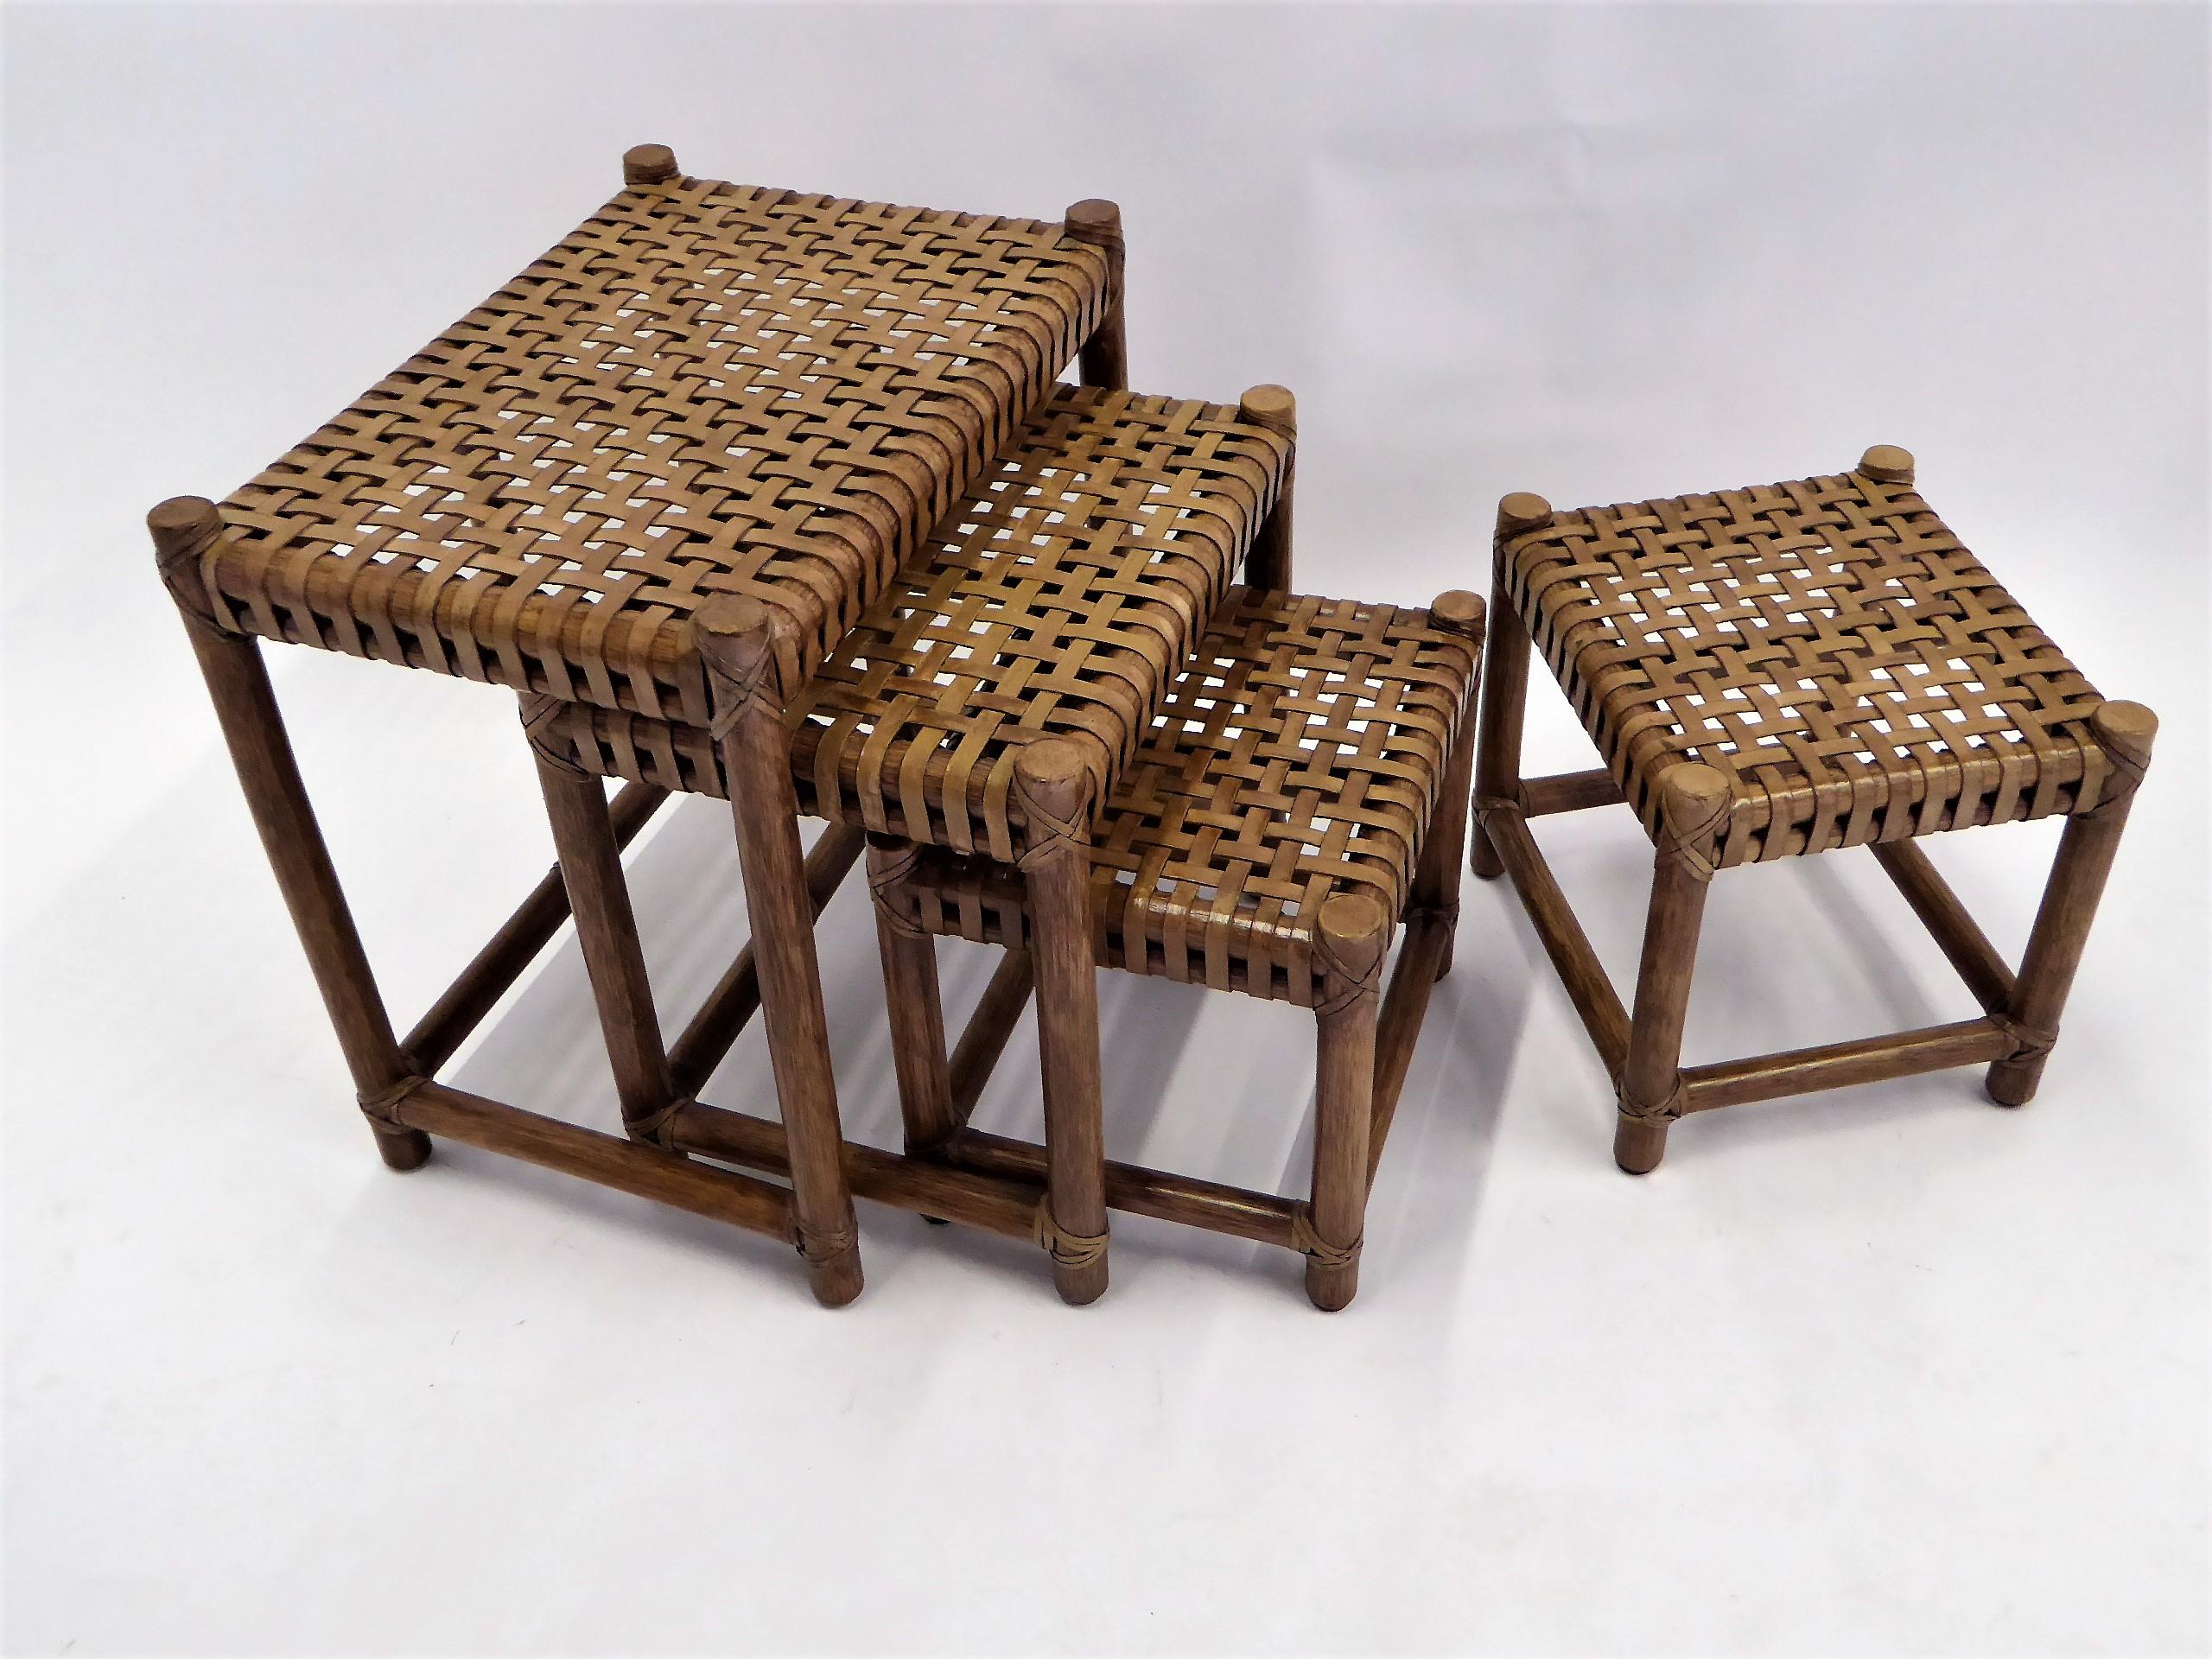 .Four McGuire Company of San Francisco, CA leather-laced nesting tables or stools. The leather is quite sturdy and has a lightly distressed finish. All the bindings and the rattan finish is superb. They all retain the metal McGuire metal tags on the